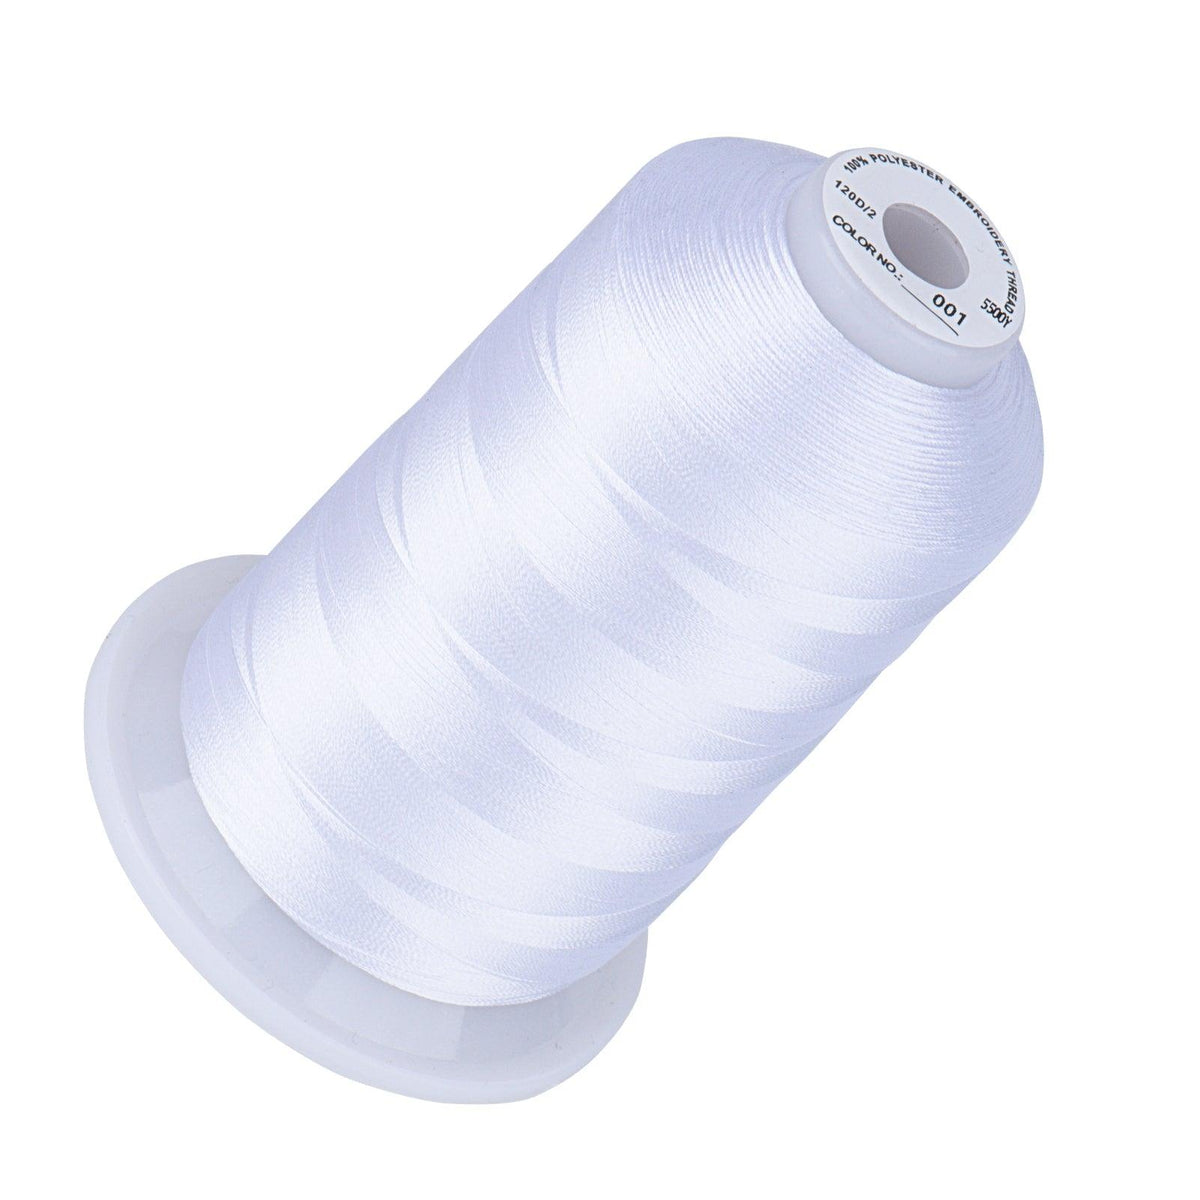 White Machine Embroidery Thread - 220 Colors - 1000 Meters —